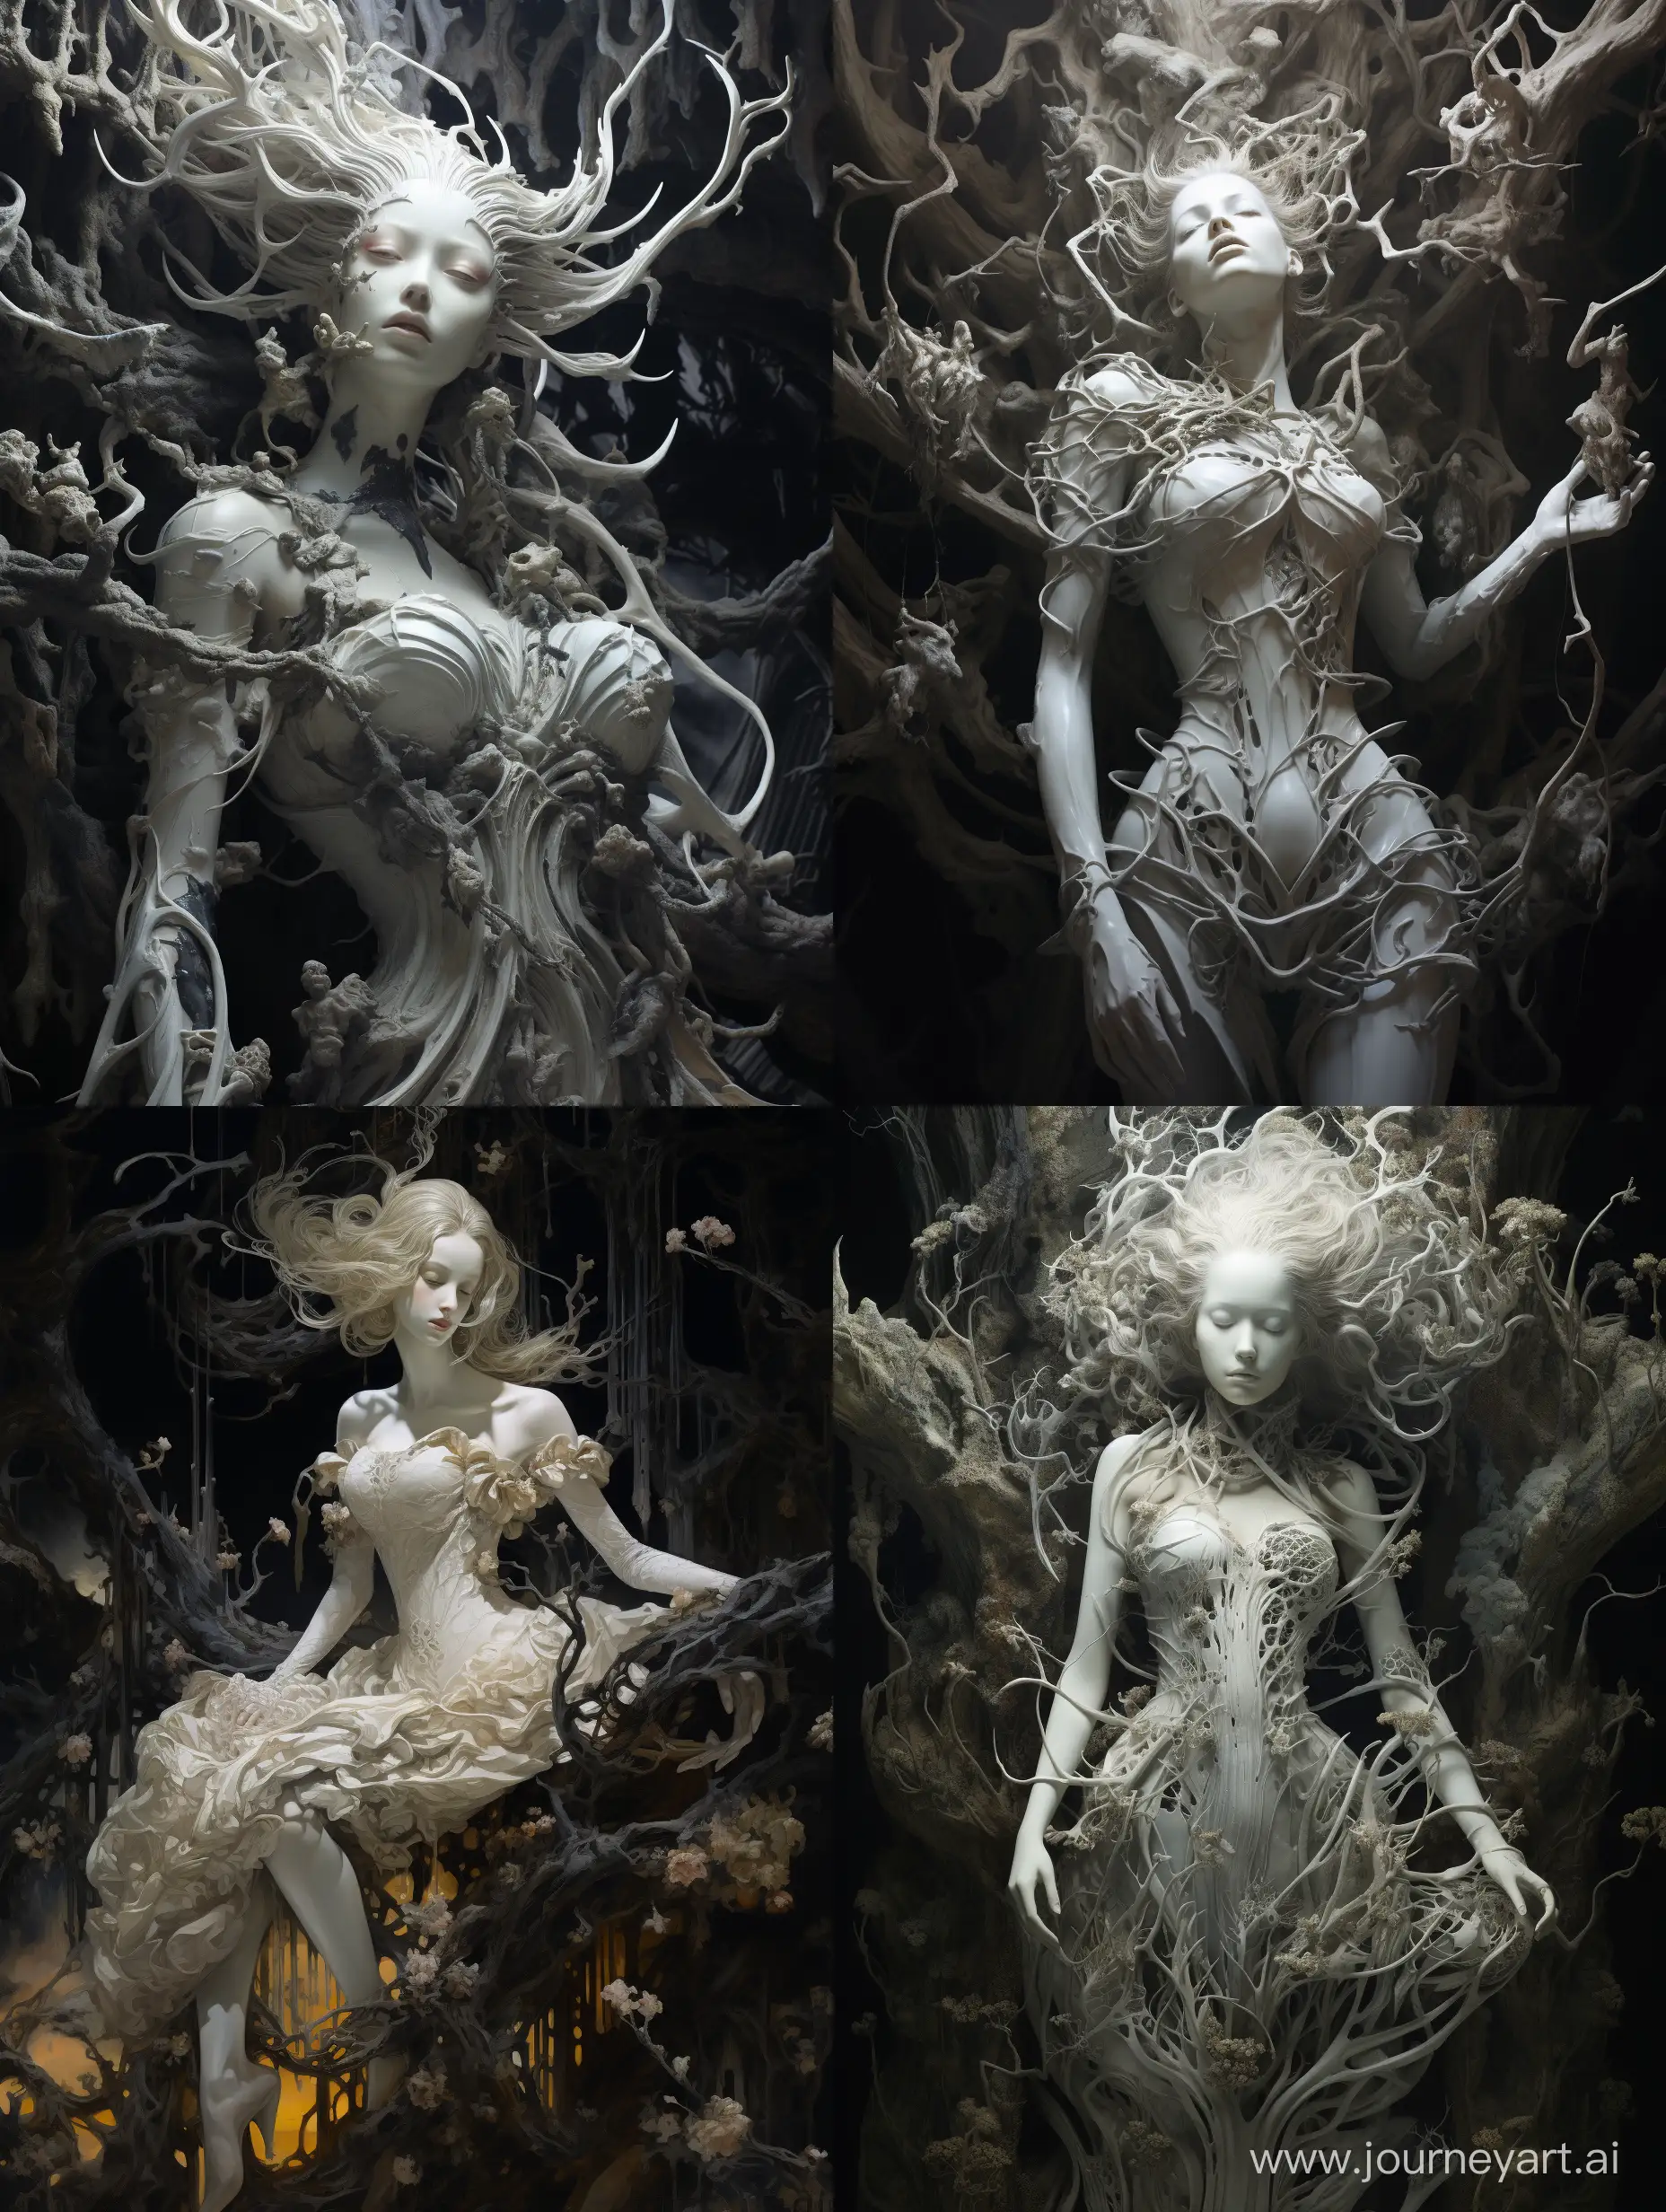 Ephemeral, ghostly apparitions of a beautiful spectral woman, dressed in flowing, tattered garments in a creepy forest with old babydolls placed in all the trees with some baby dolls suspended in the air hanging in the trees:: 16k :: high contrast extremely details, 16k resolution, intricate